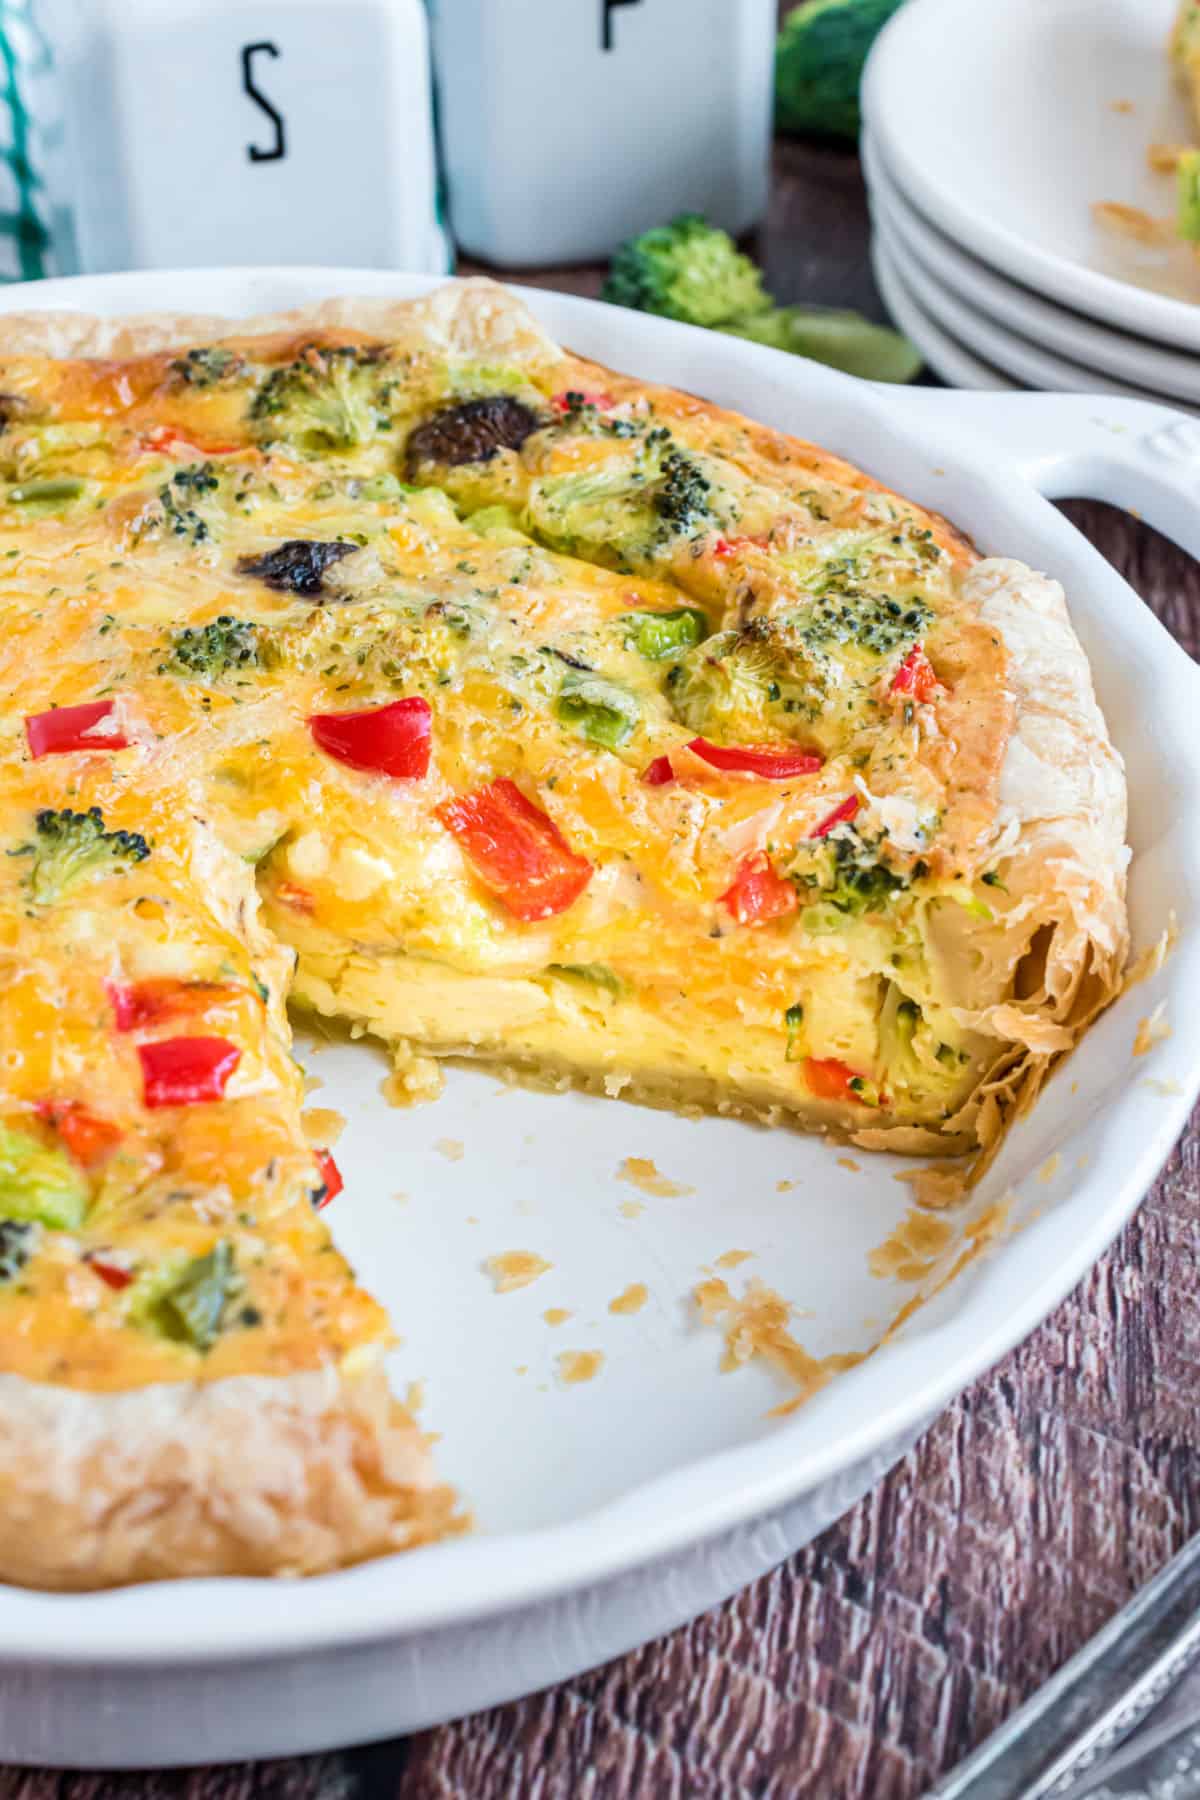 Veggie quiche in pie plate with one slice removed.